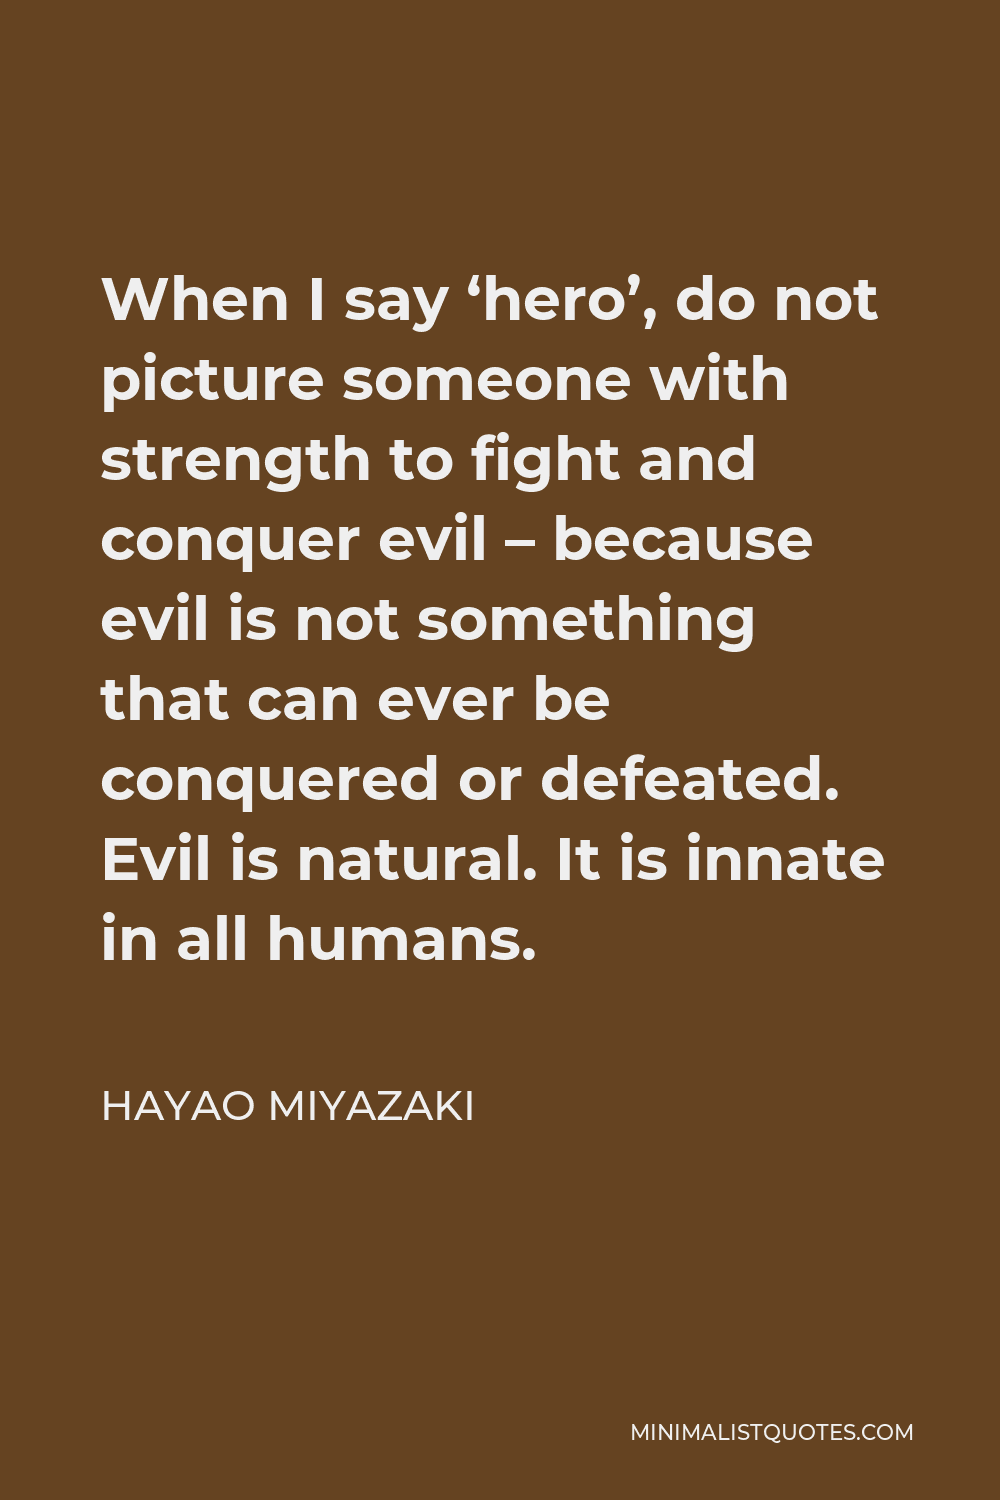 Hayao Miyazaki Quote - When I say ‘hero’, do not picture someone with strength to fight and conquer evil – because evil is not something that can ever be conquered or defeated. Evil is natural. It is innate in all humans.